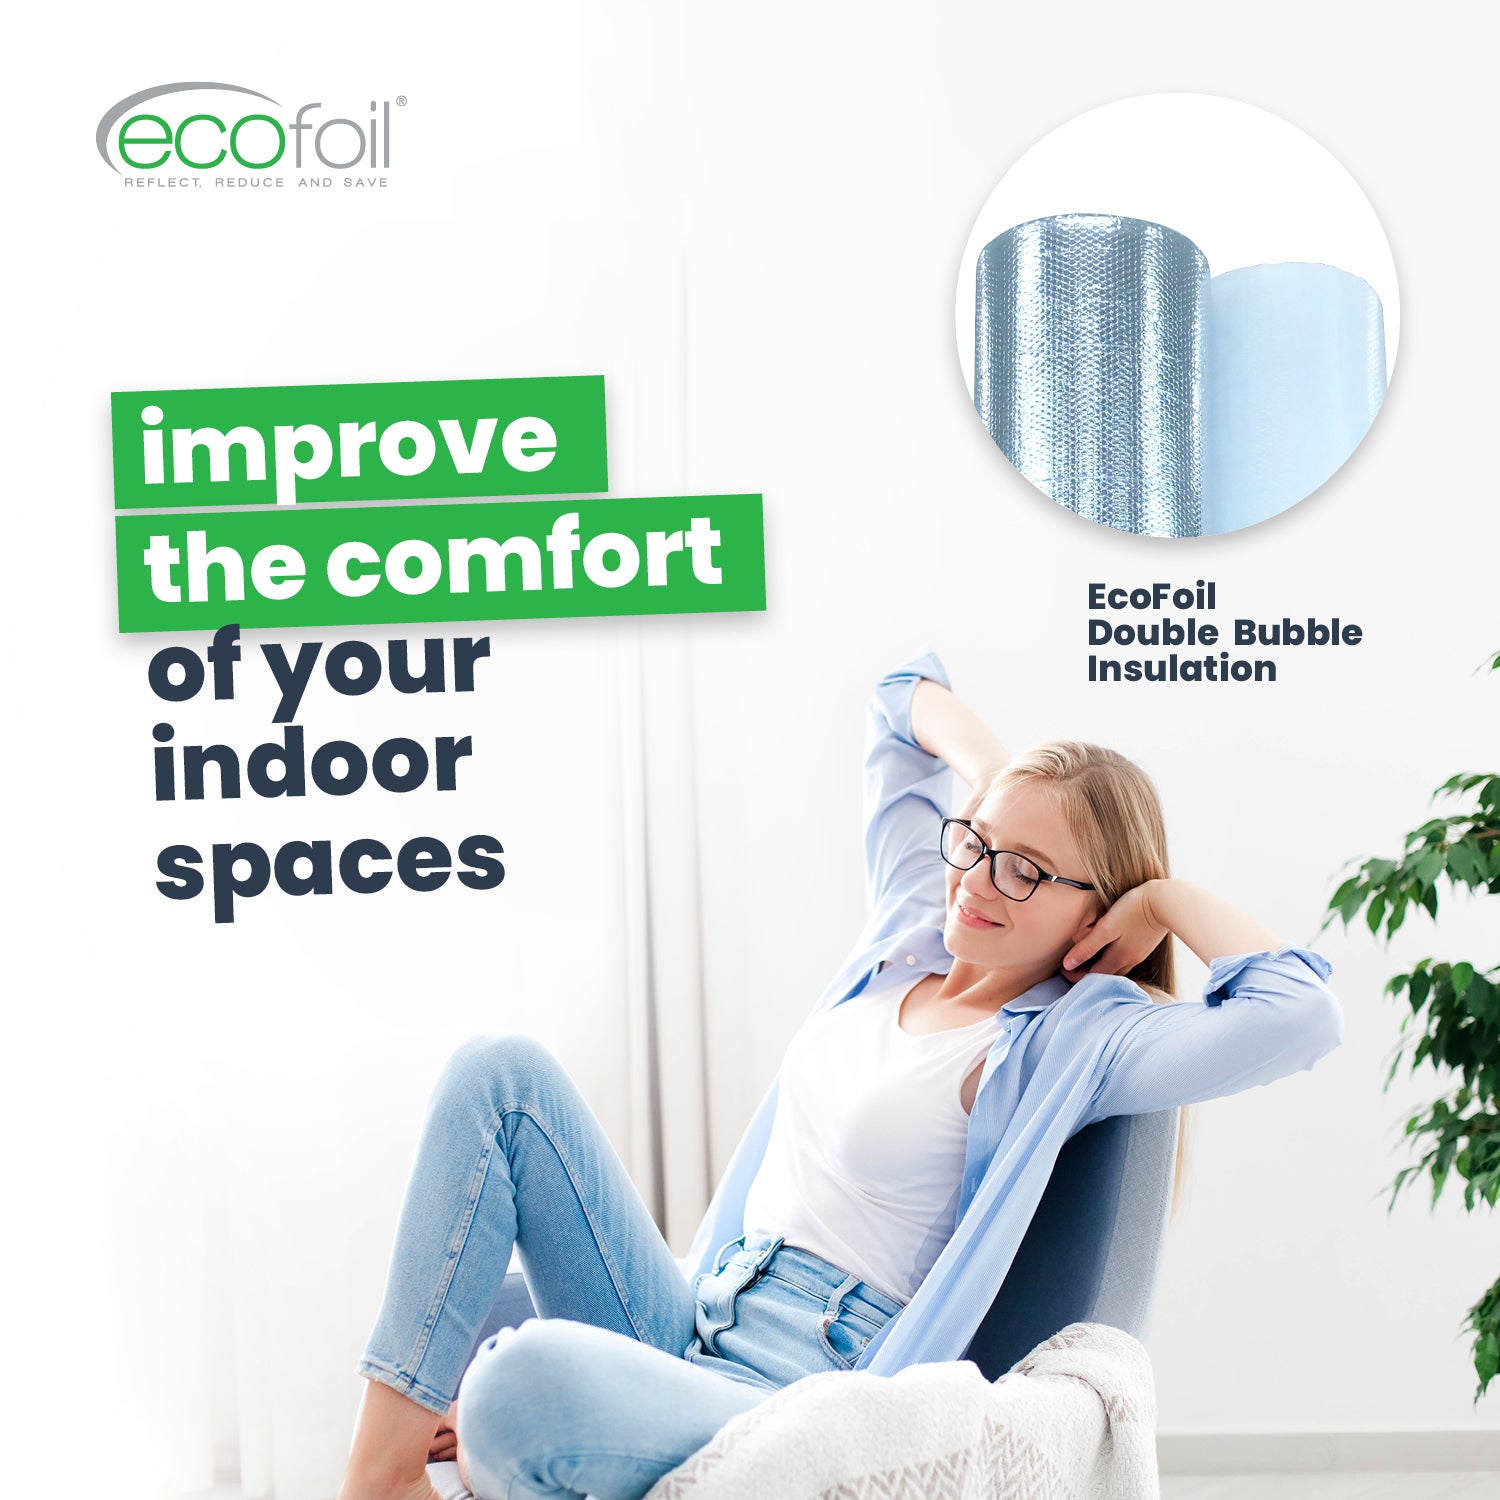 improve the comfort of indoor spaces with ecofoil double bubble